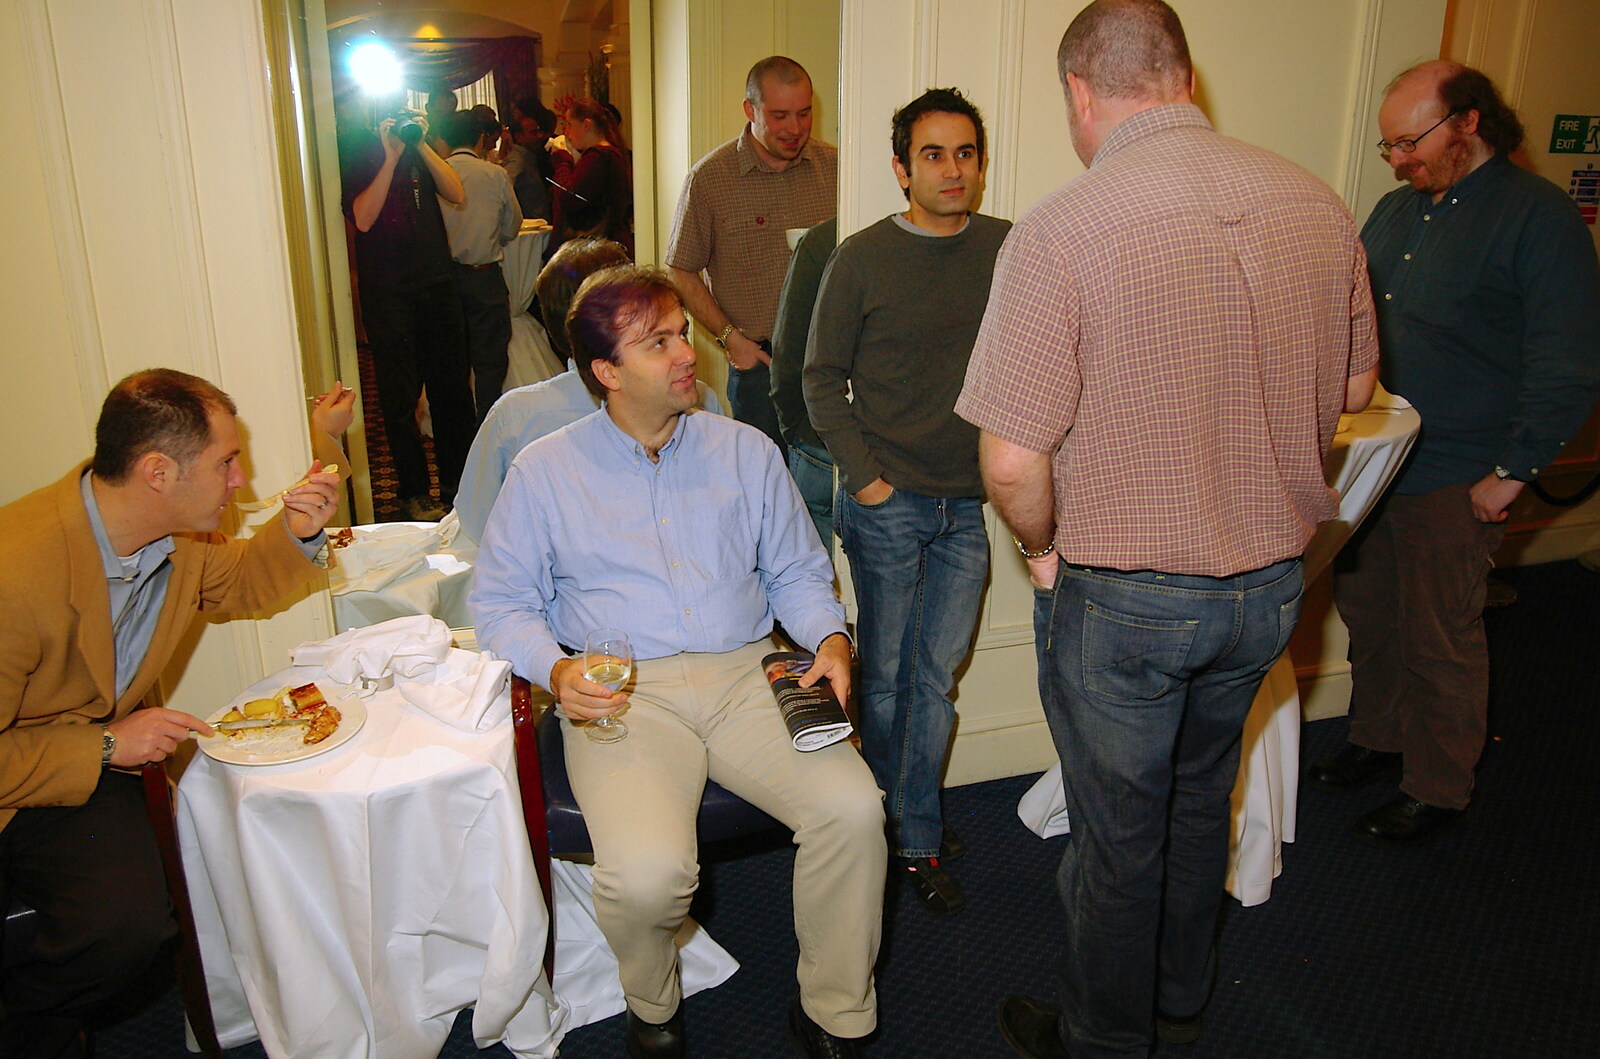 Liviu has a sit down from Qualcomm Europe All-Hands at the Berkeley Hotel, London - 9th November 2005